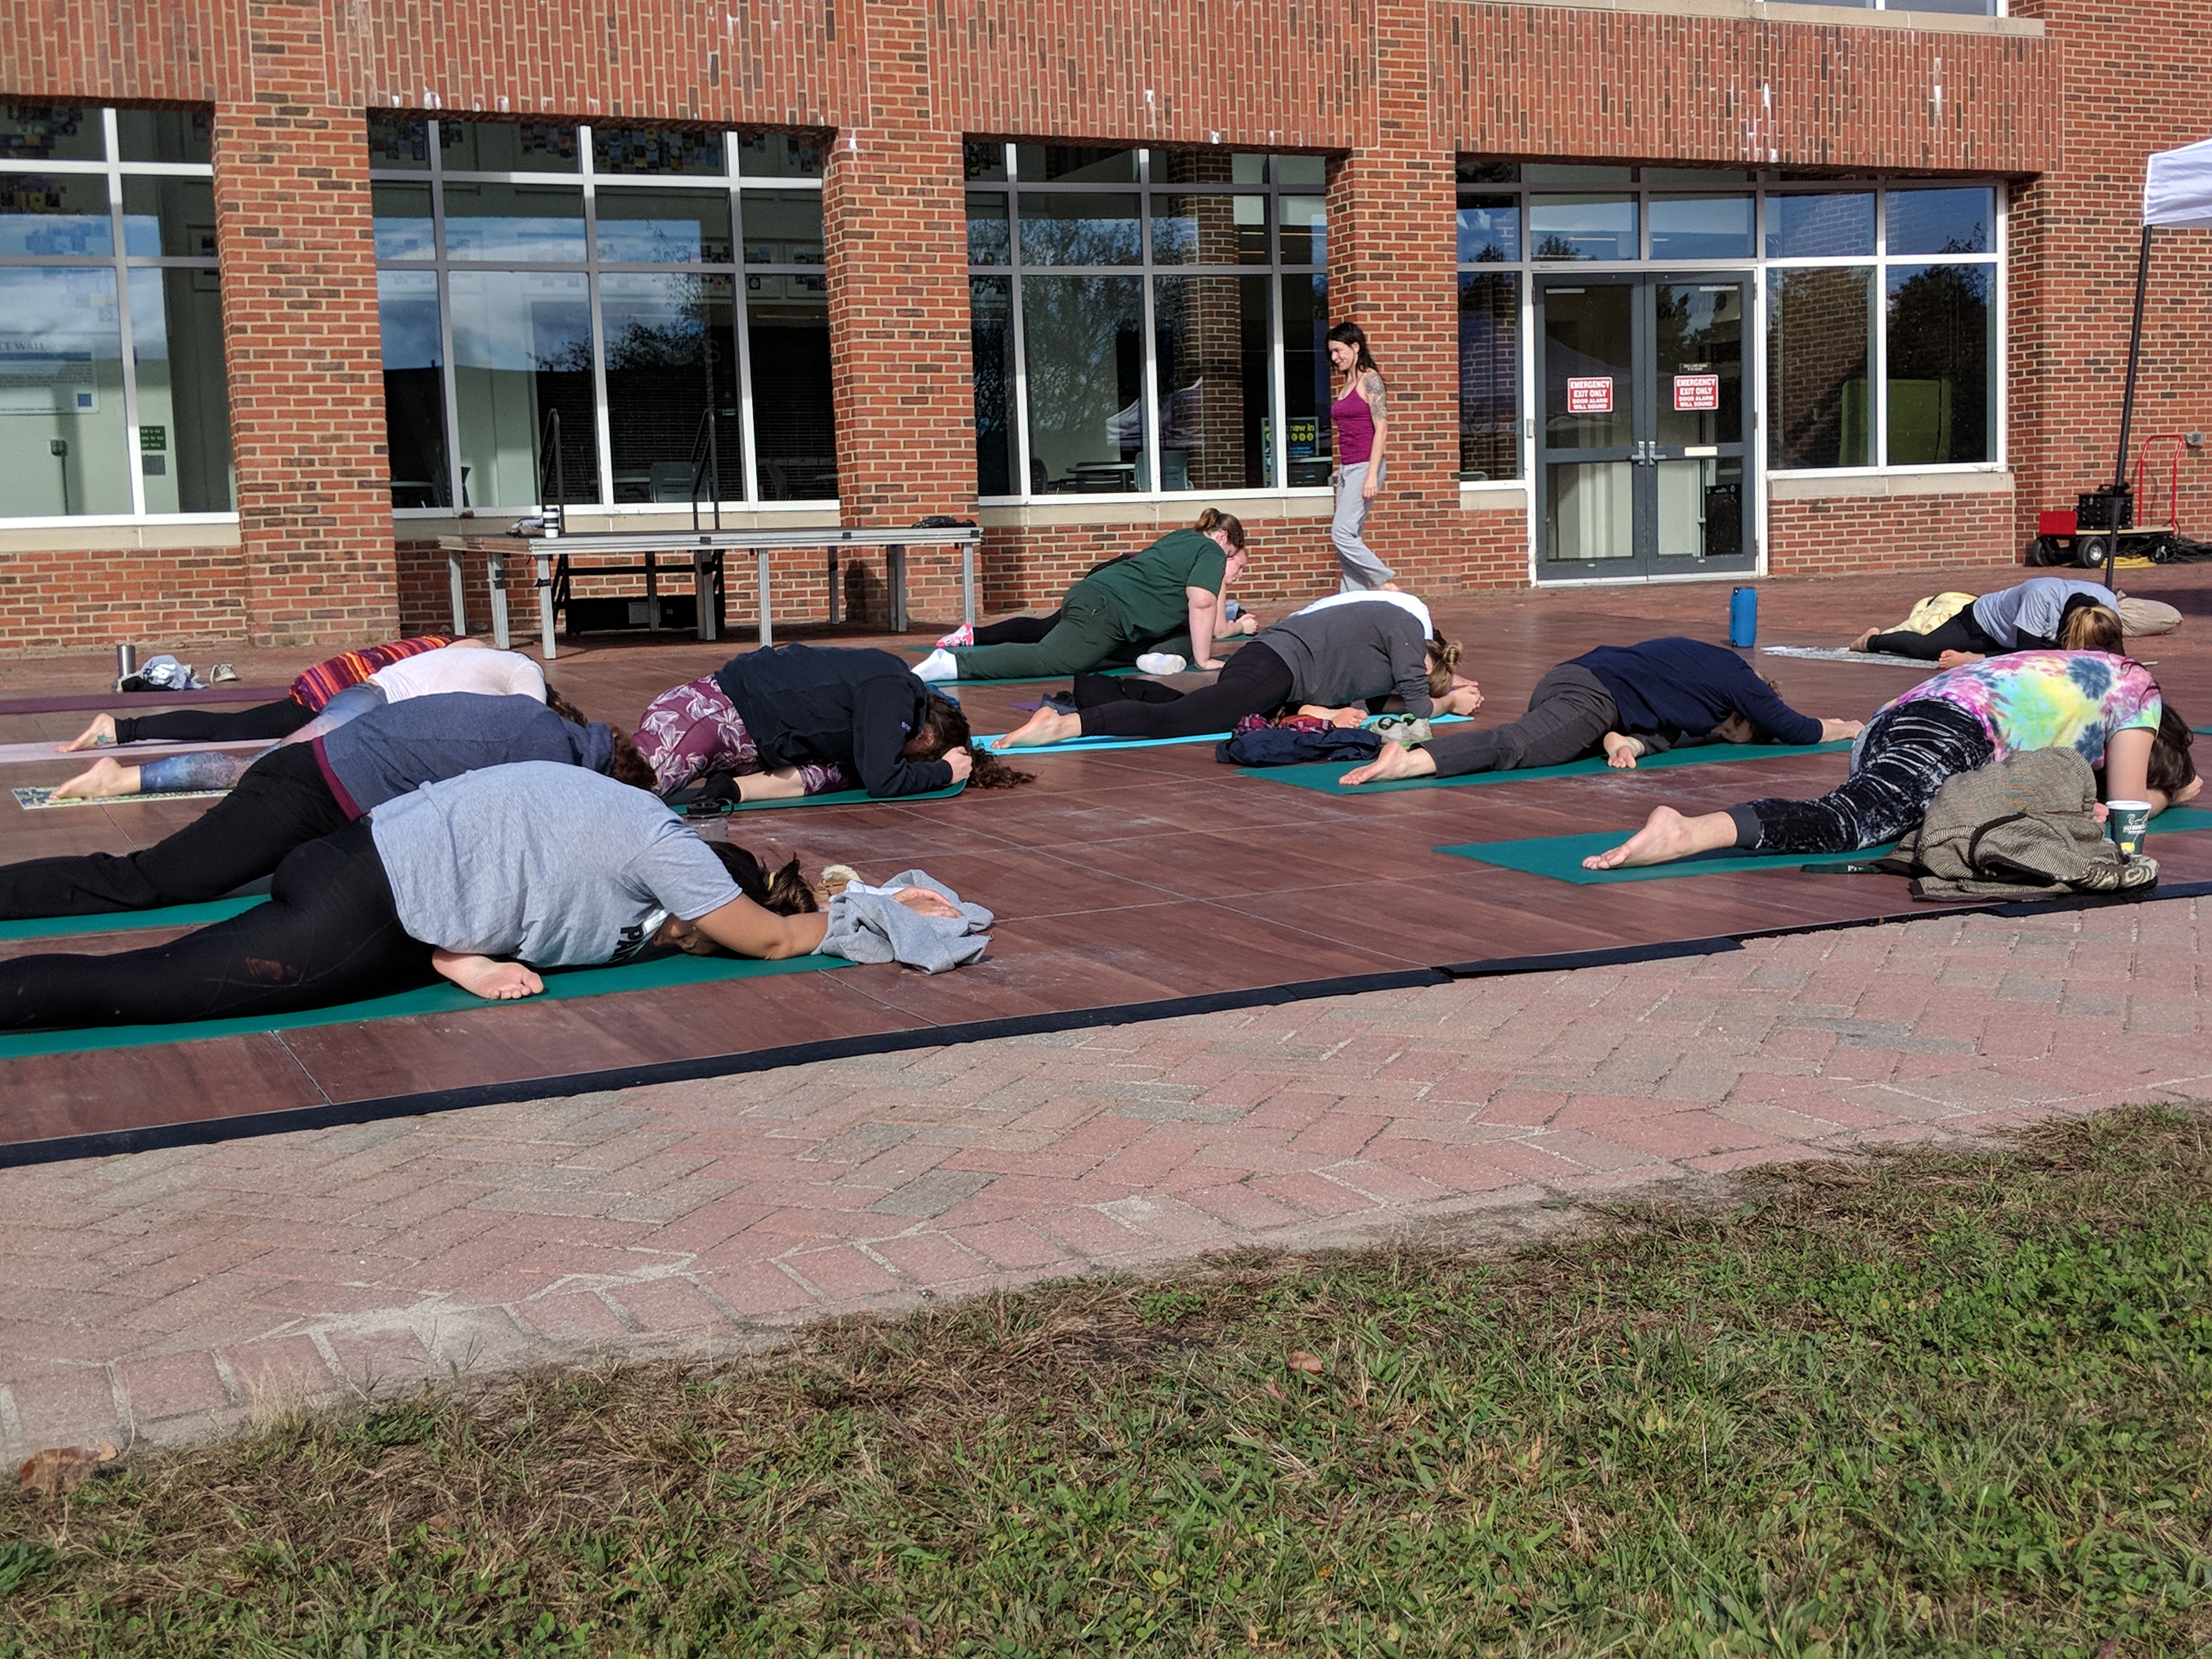 Members of the PSU community gathered for some wellness events on Homecoming morning.